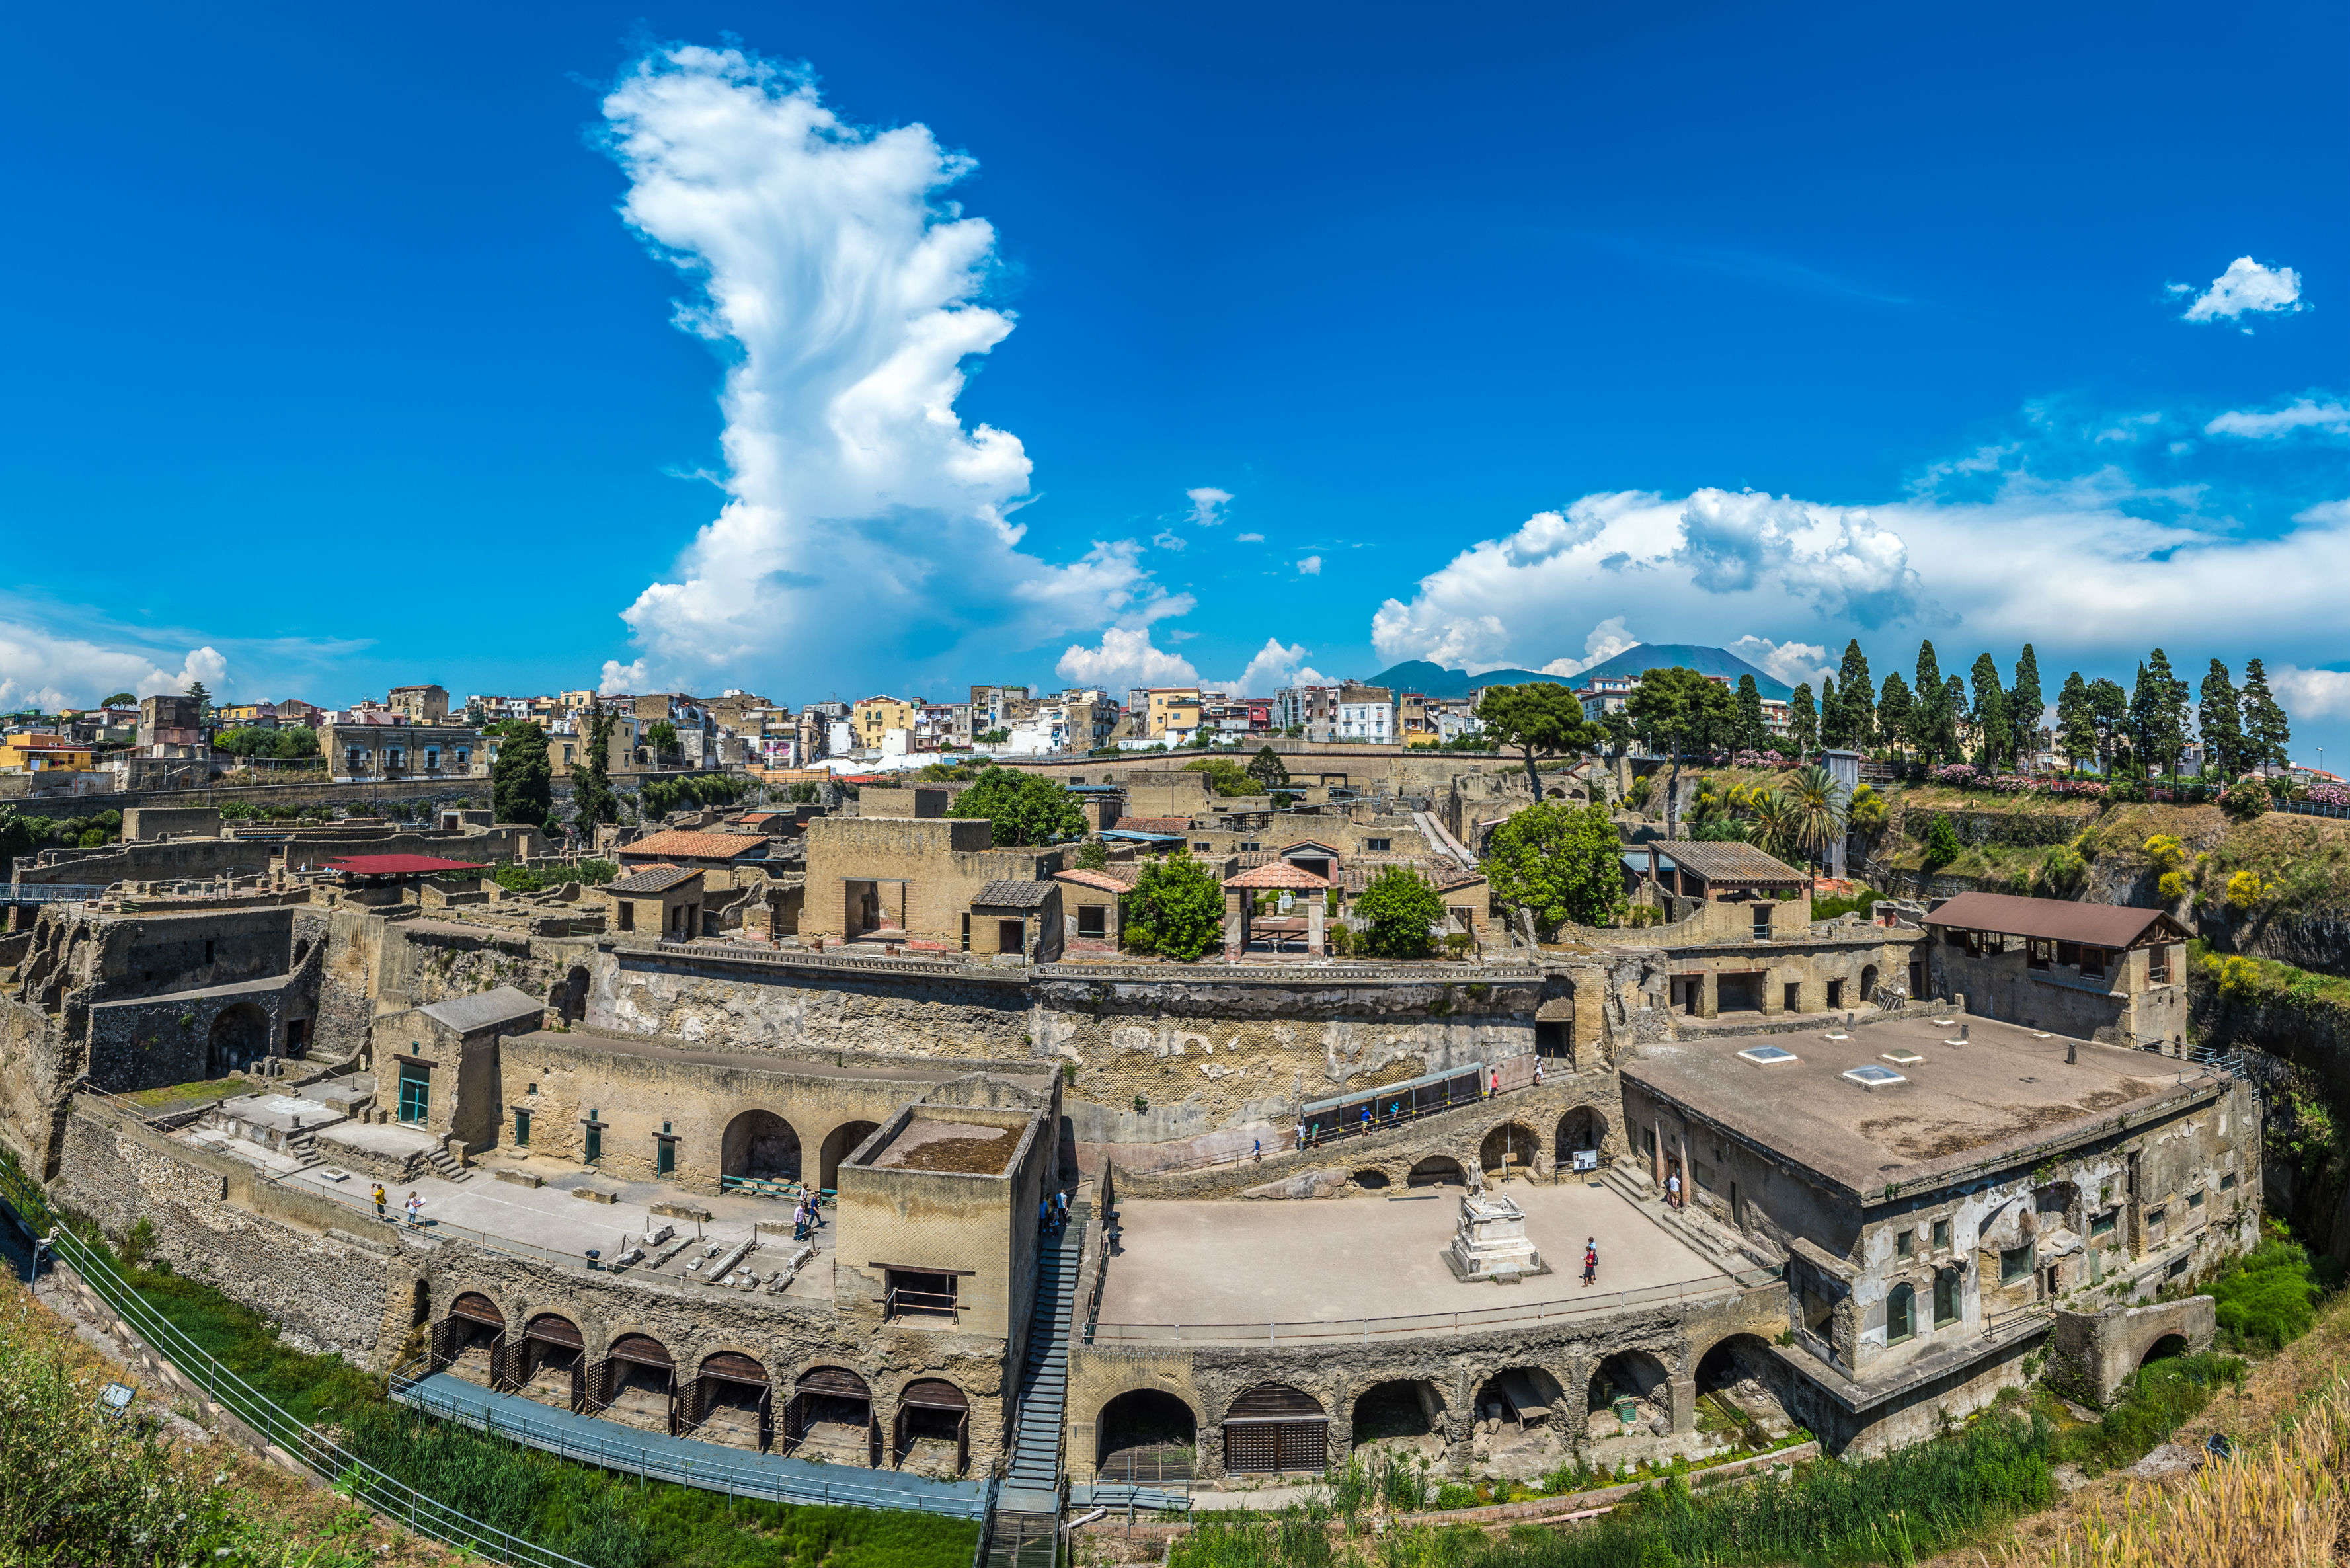 Herculaneum’s ancient Roman home is now open for public visits